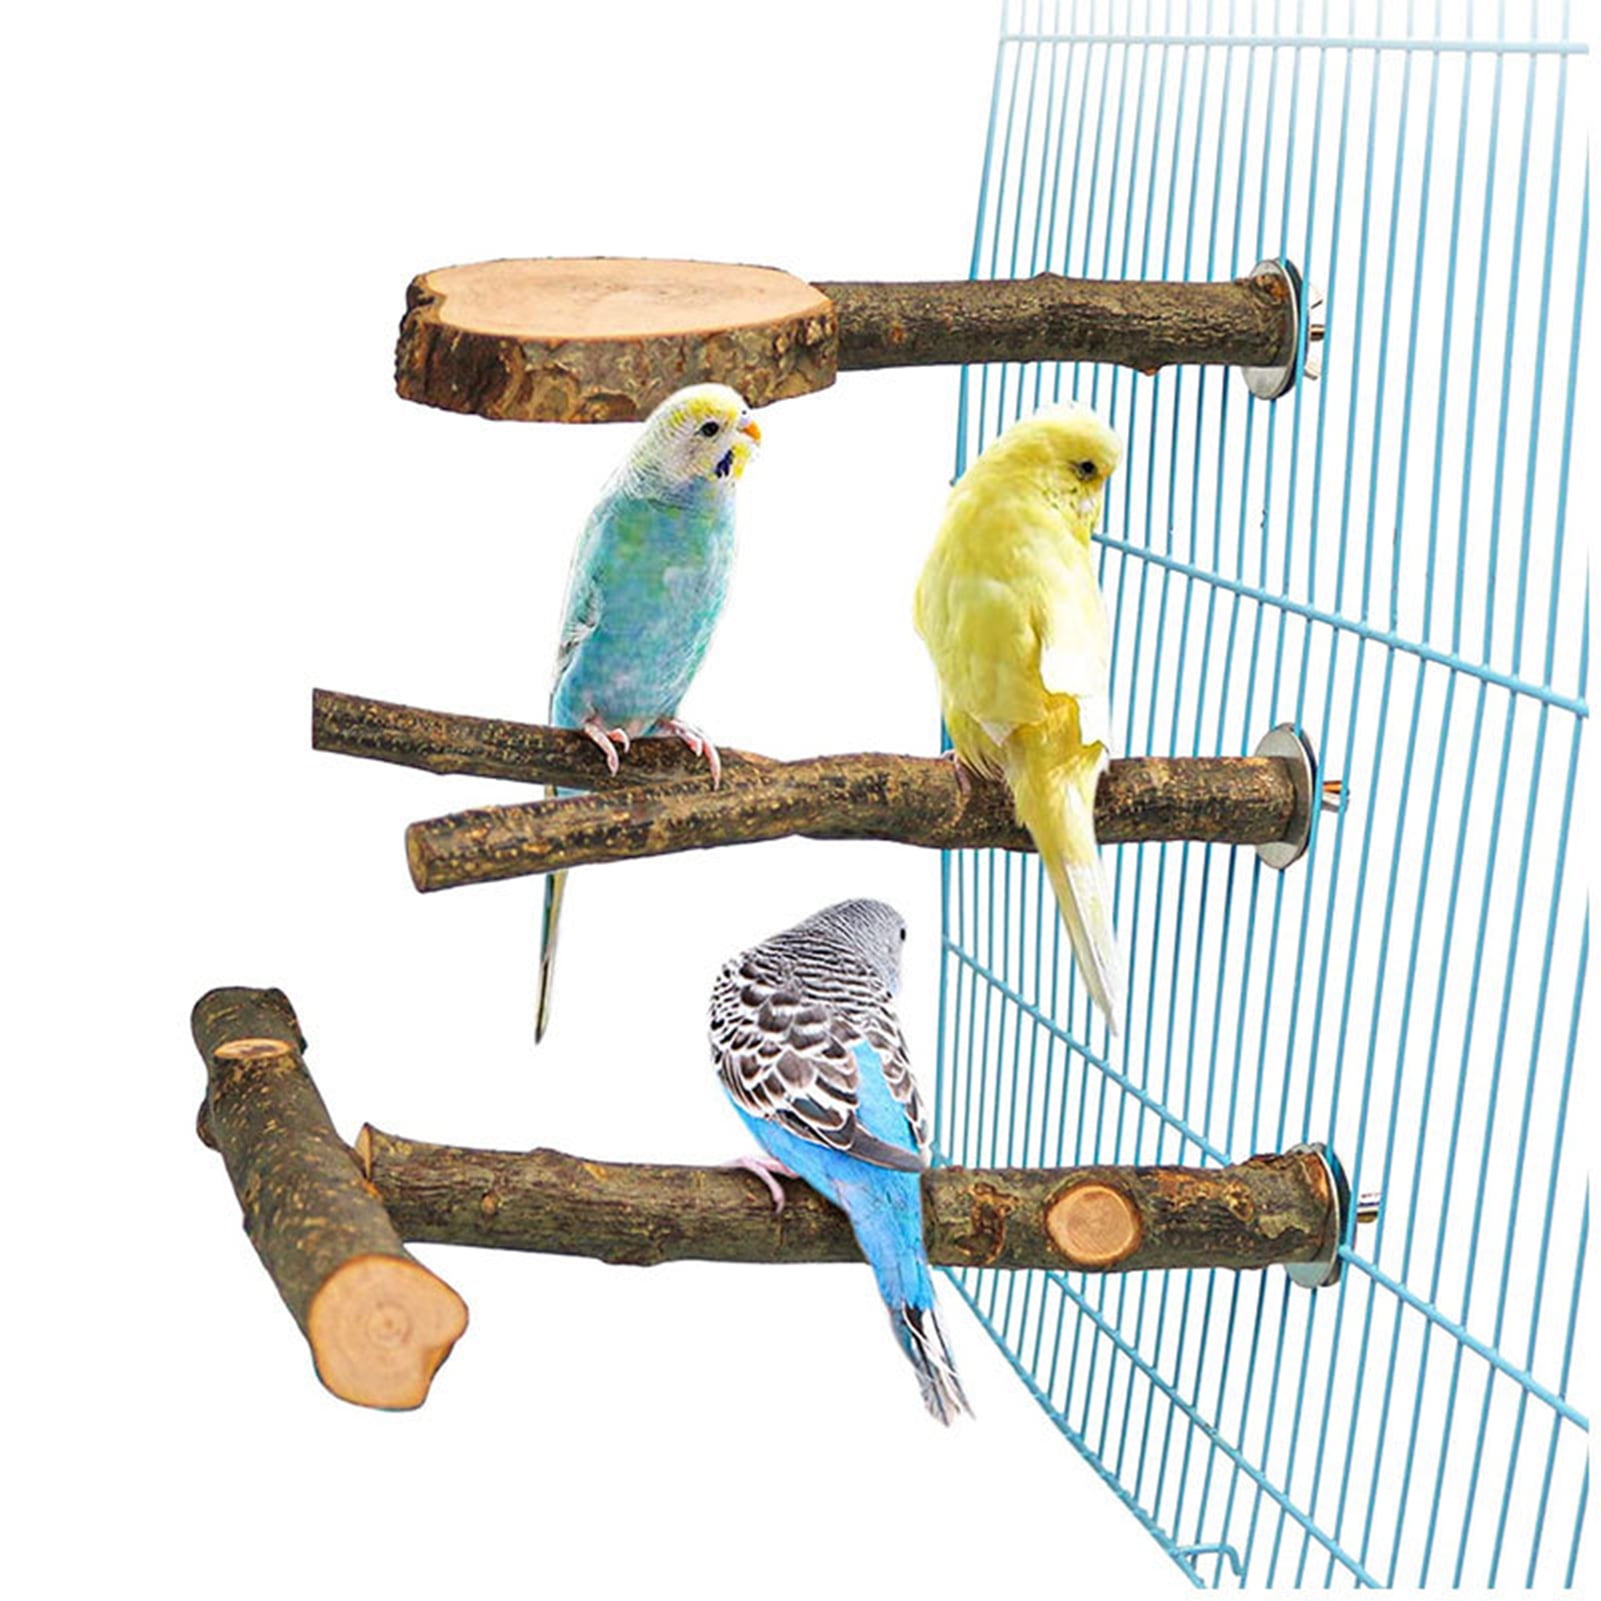 QBLEEV Round Natural Wood Bird Perch Platform Toy for Bird Cage Playground Springboard Paw Grinding Clean for Small and Medium Parrots Parakeet Budgies Hamster Cage 